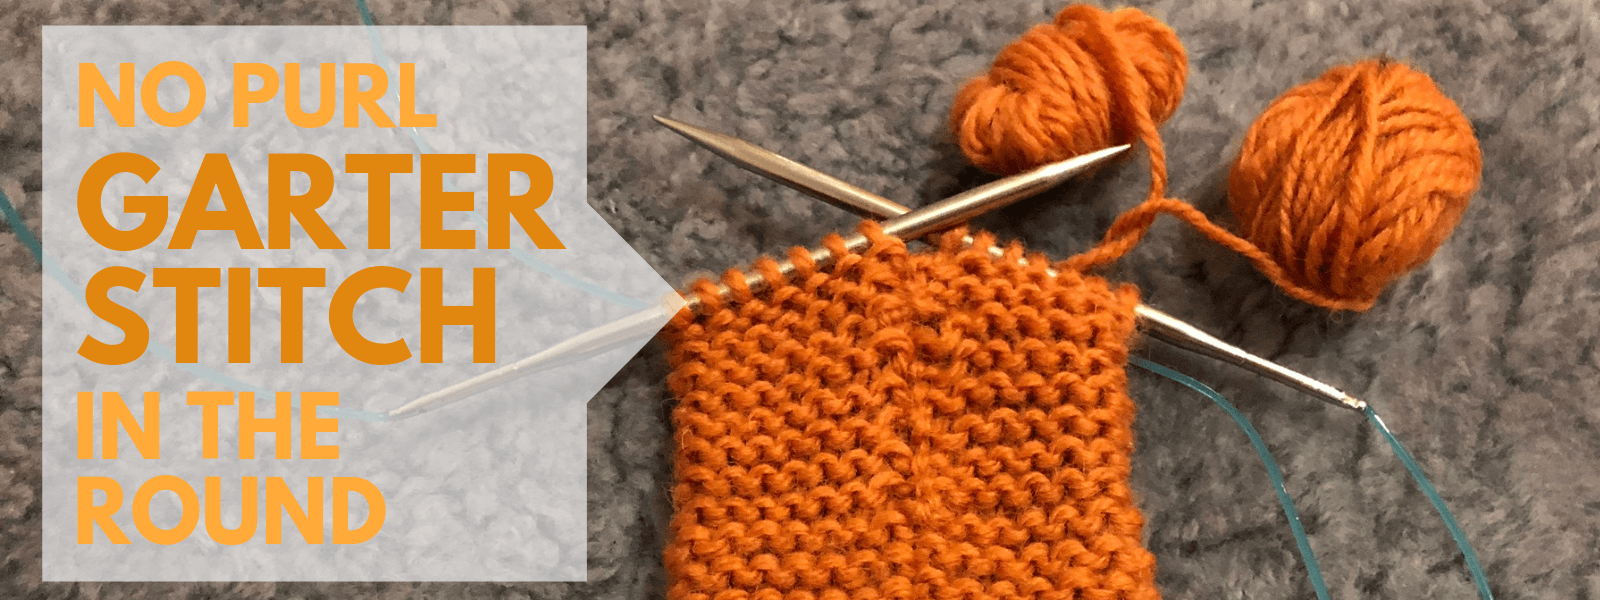 Download No purl garter stitch in the round | Don't Be Such A Square